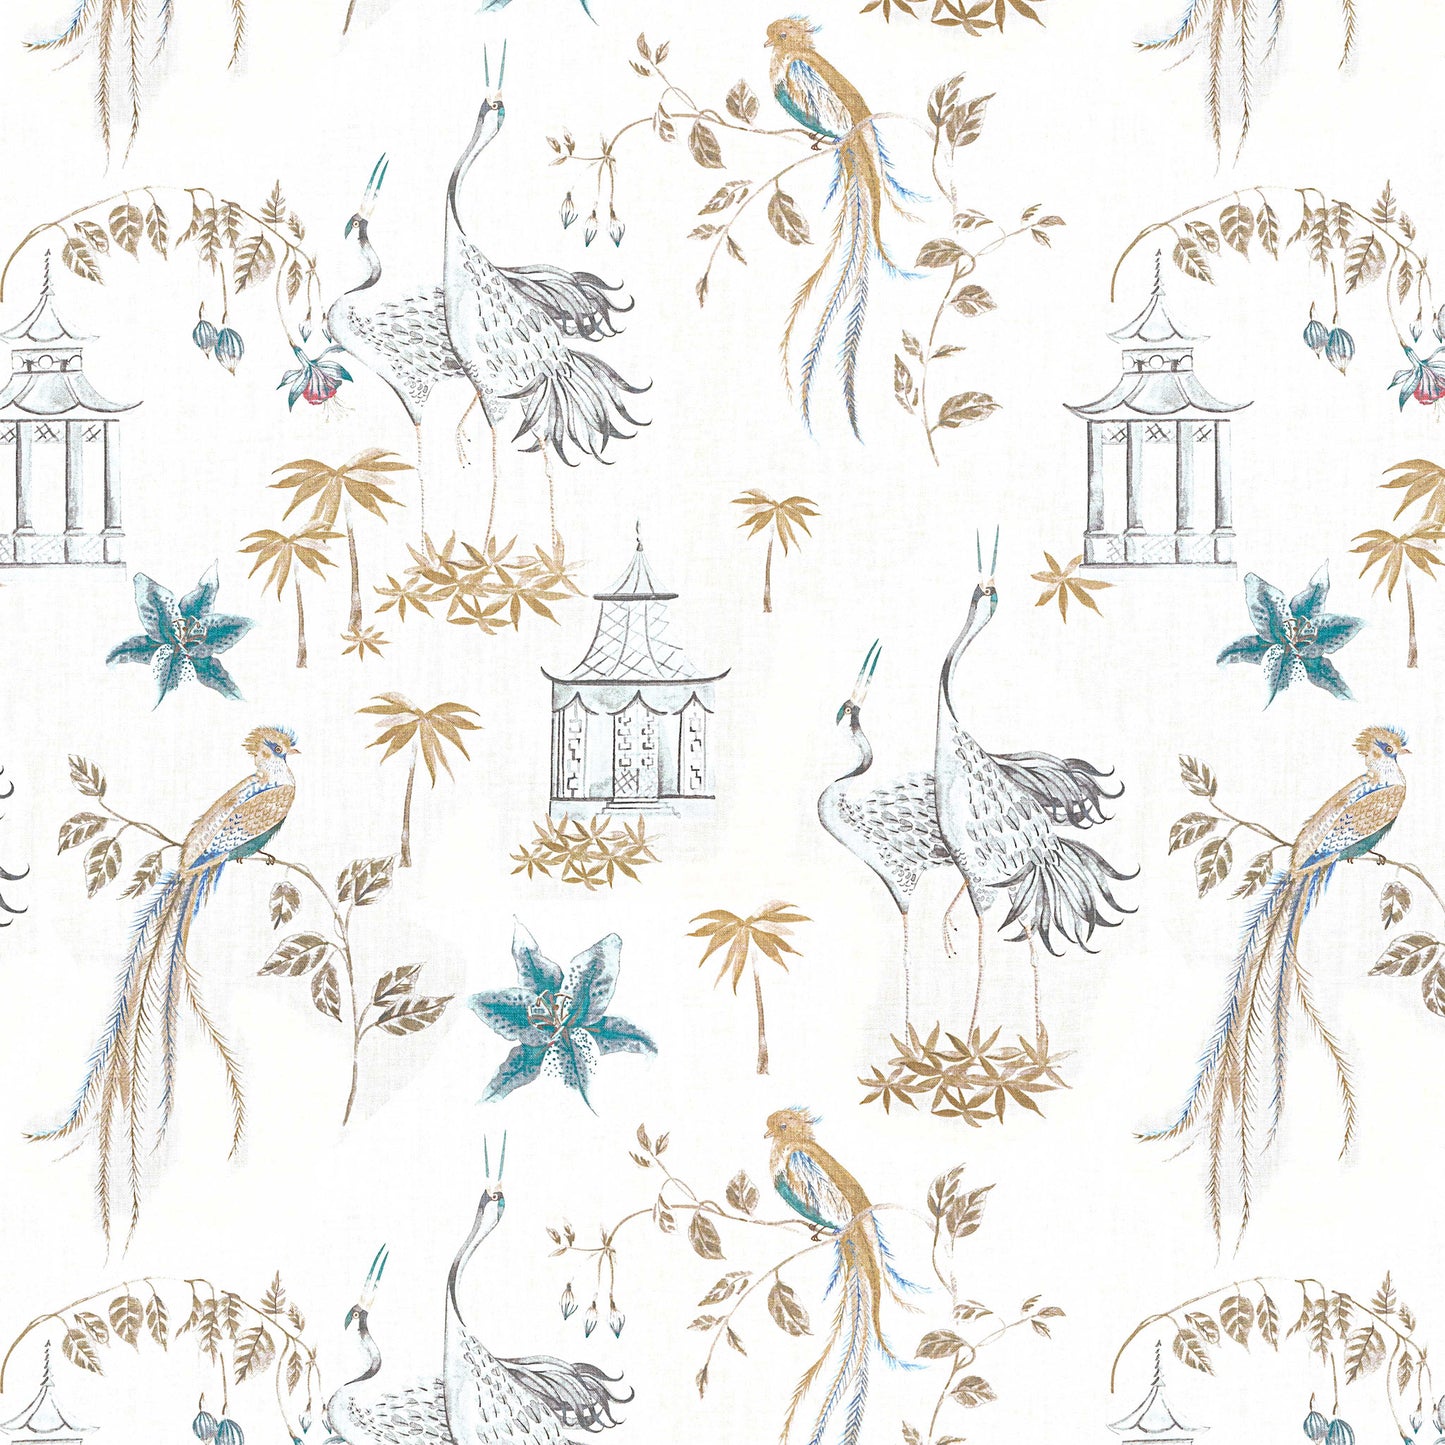 Tab Top Curtain Panels Pair in Let It Crane Aegean Blue Oriental Toile, Multicolor Chinoiserie